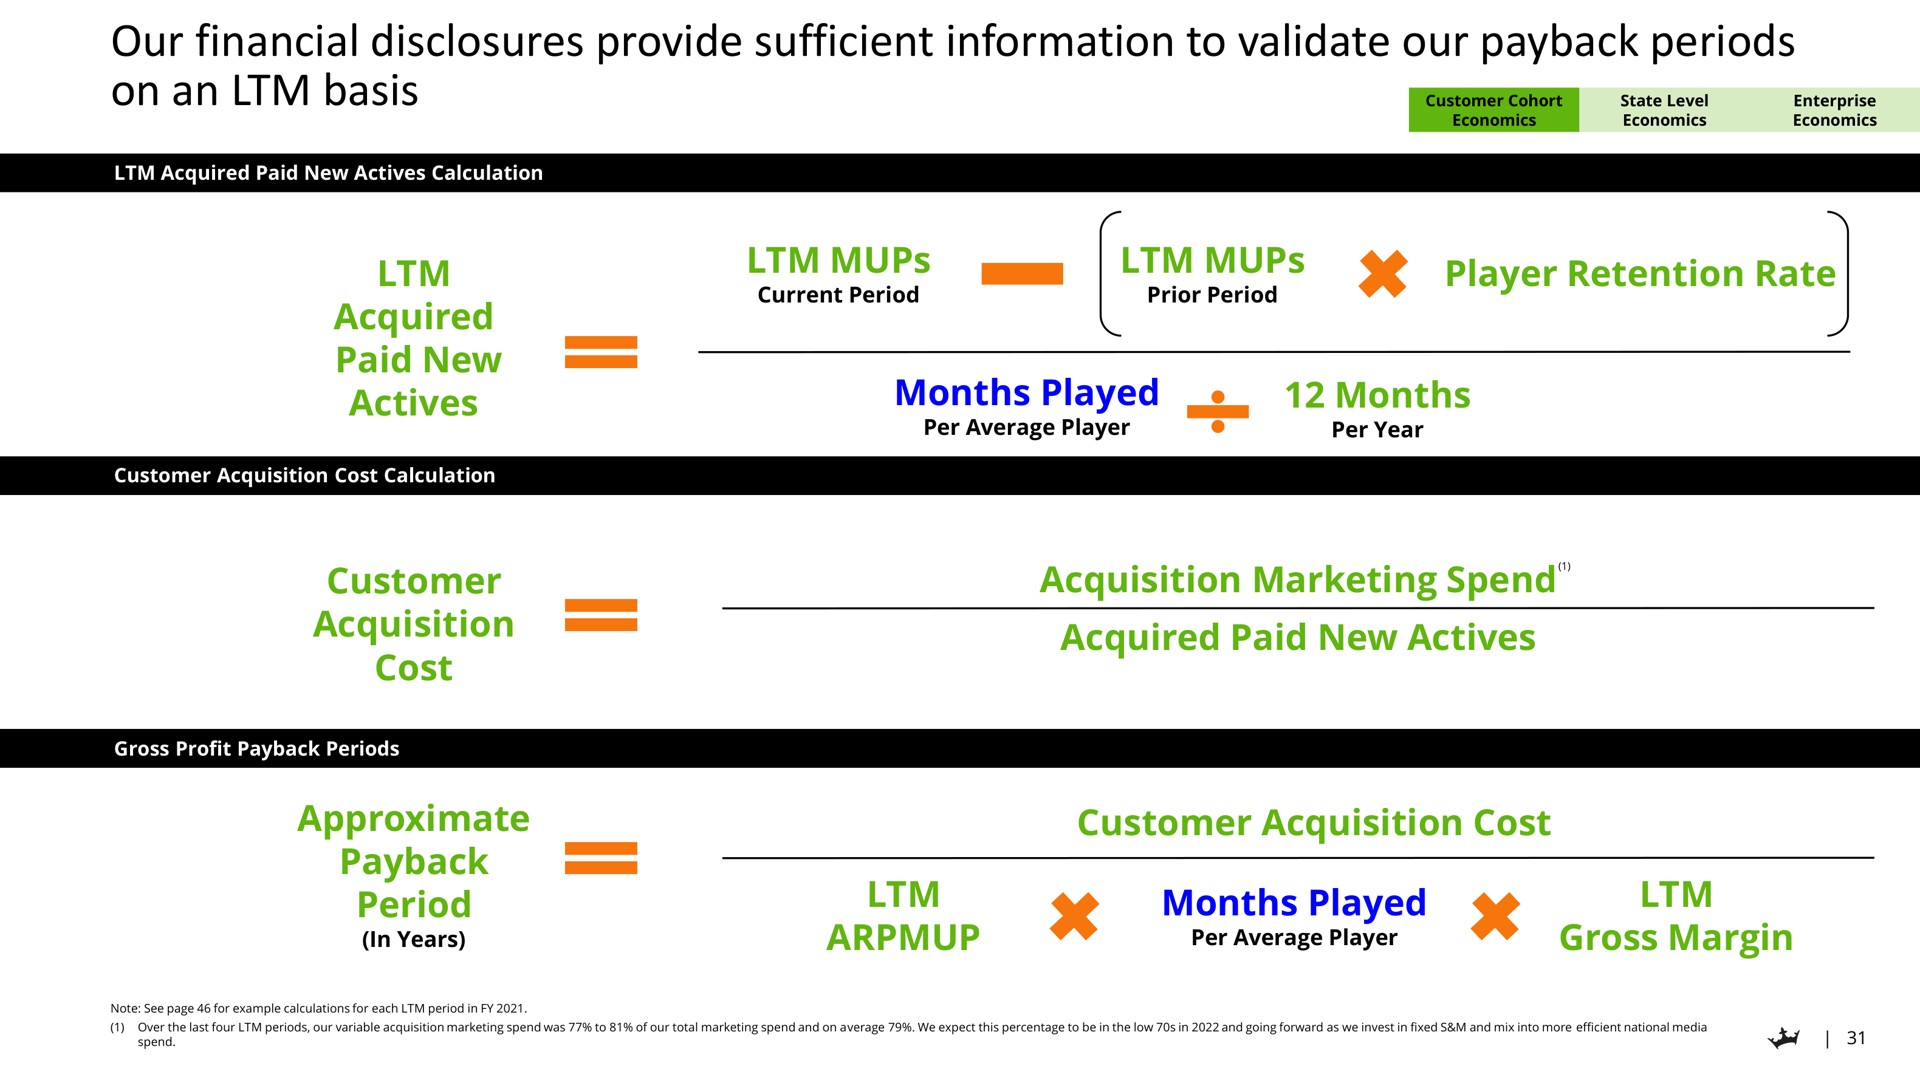 our financial disclosures provide sufficient information to validate our periods on an basis acquired paid new actives customer acquisition cost approximate period player retention rate months played months acquisition marketing spend acquired paid new actives customer acquisition cost months played gross margin | DraftKings